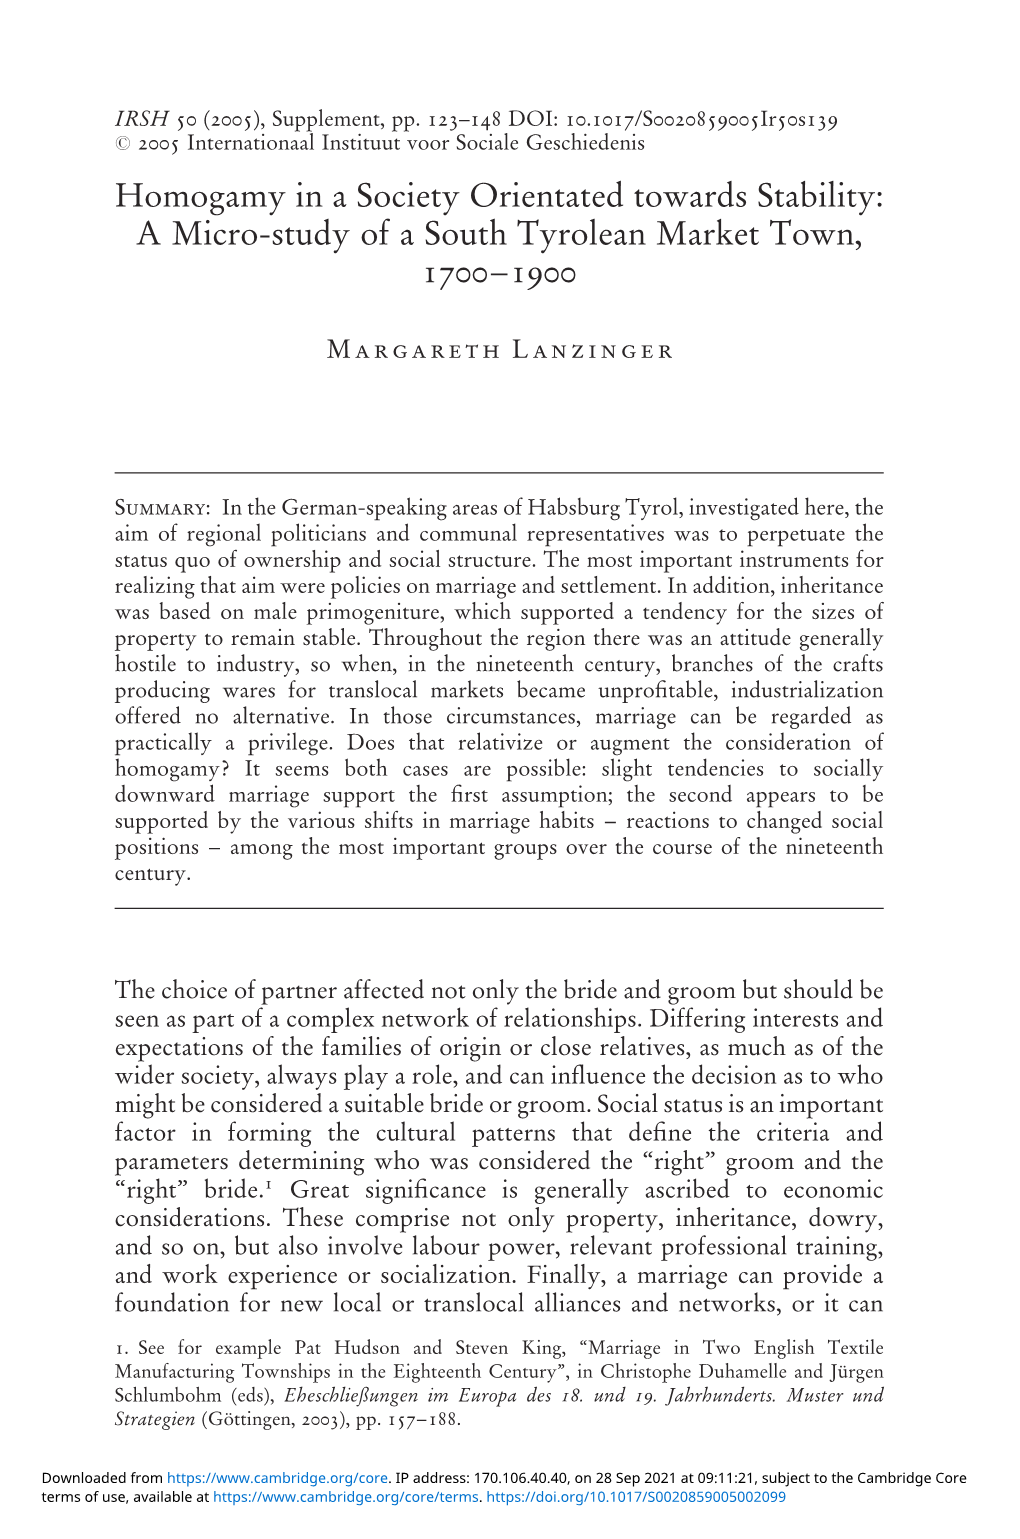 Homogamy in a Society Orientated Towards Stability: a Micro-Study of a South Tyrolean Market Town, 1700–1900